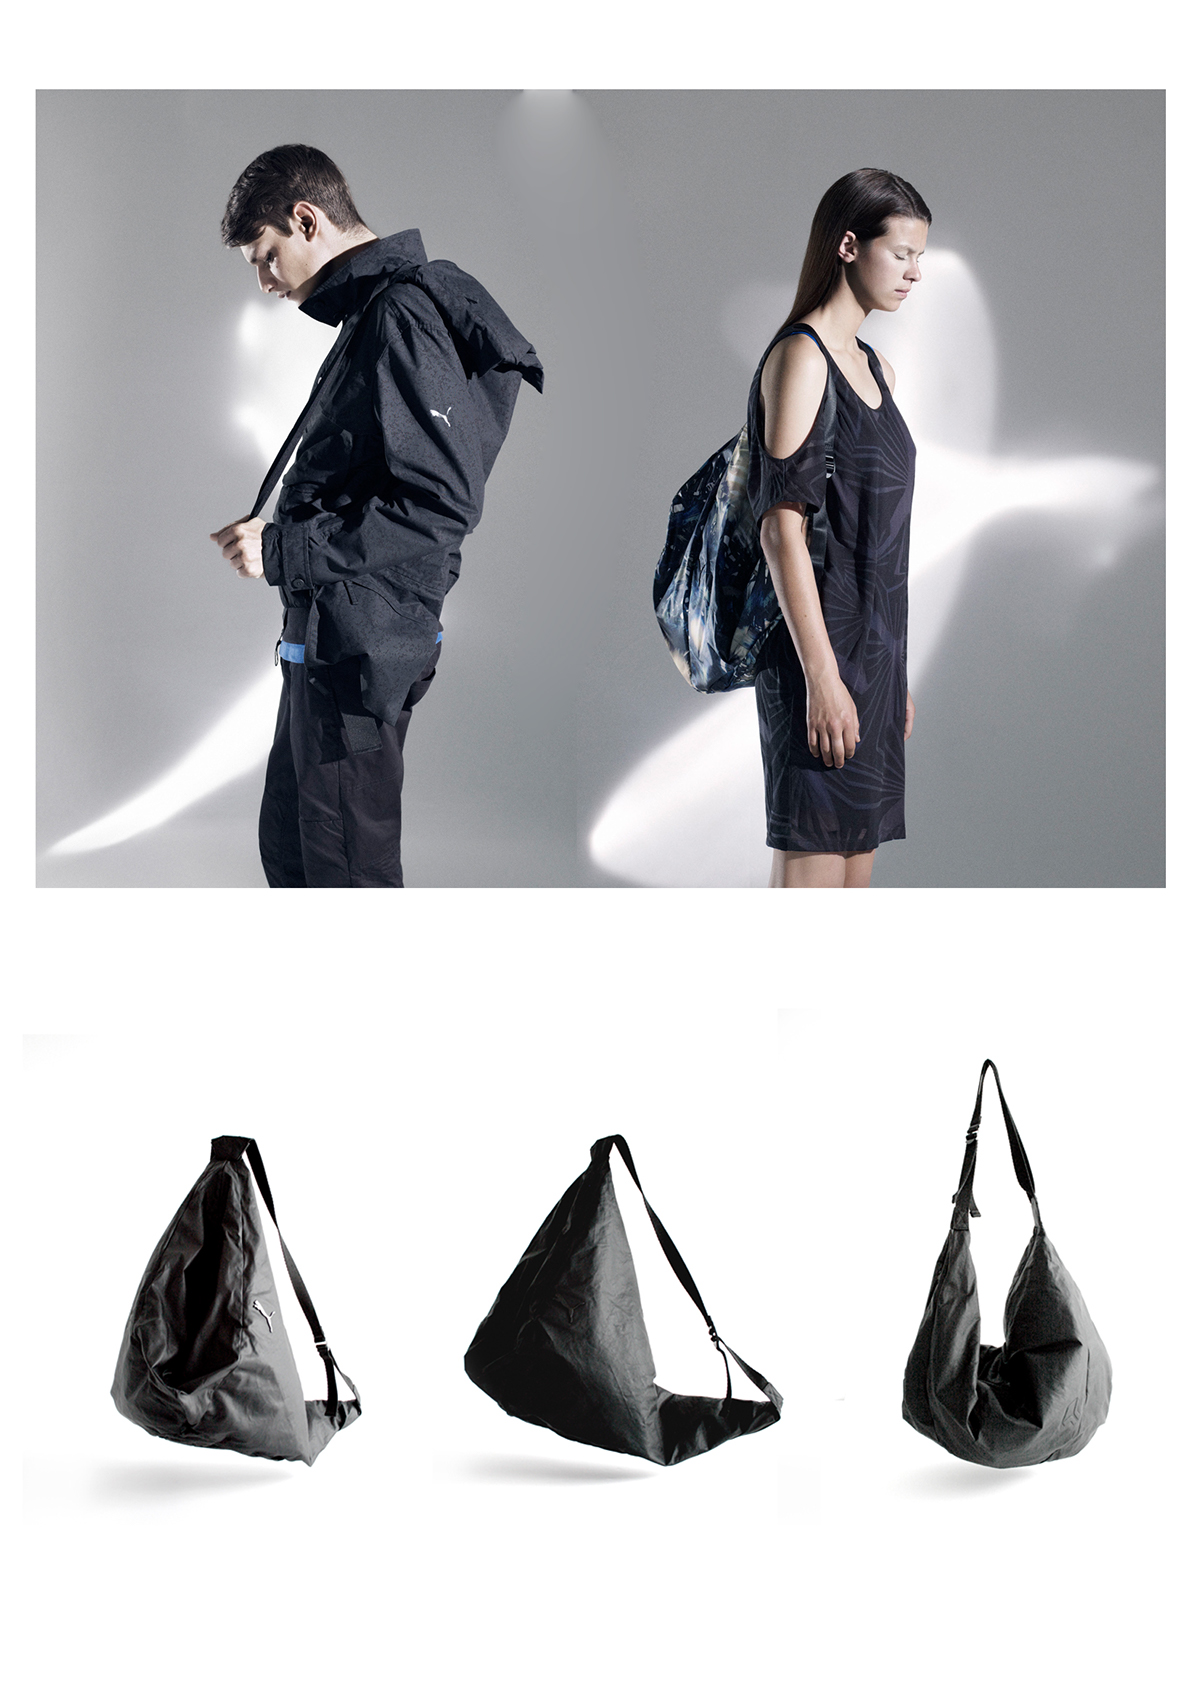 puma Hussein Chalayan Urban mobility SOLENE ROURE Frenchster accessories urban mobility CHALAYAN SOLENE ROURE bags Wire Bags Hooded Backpack Hobo